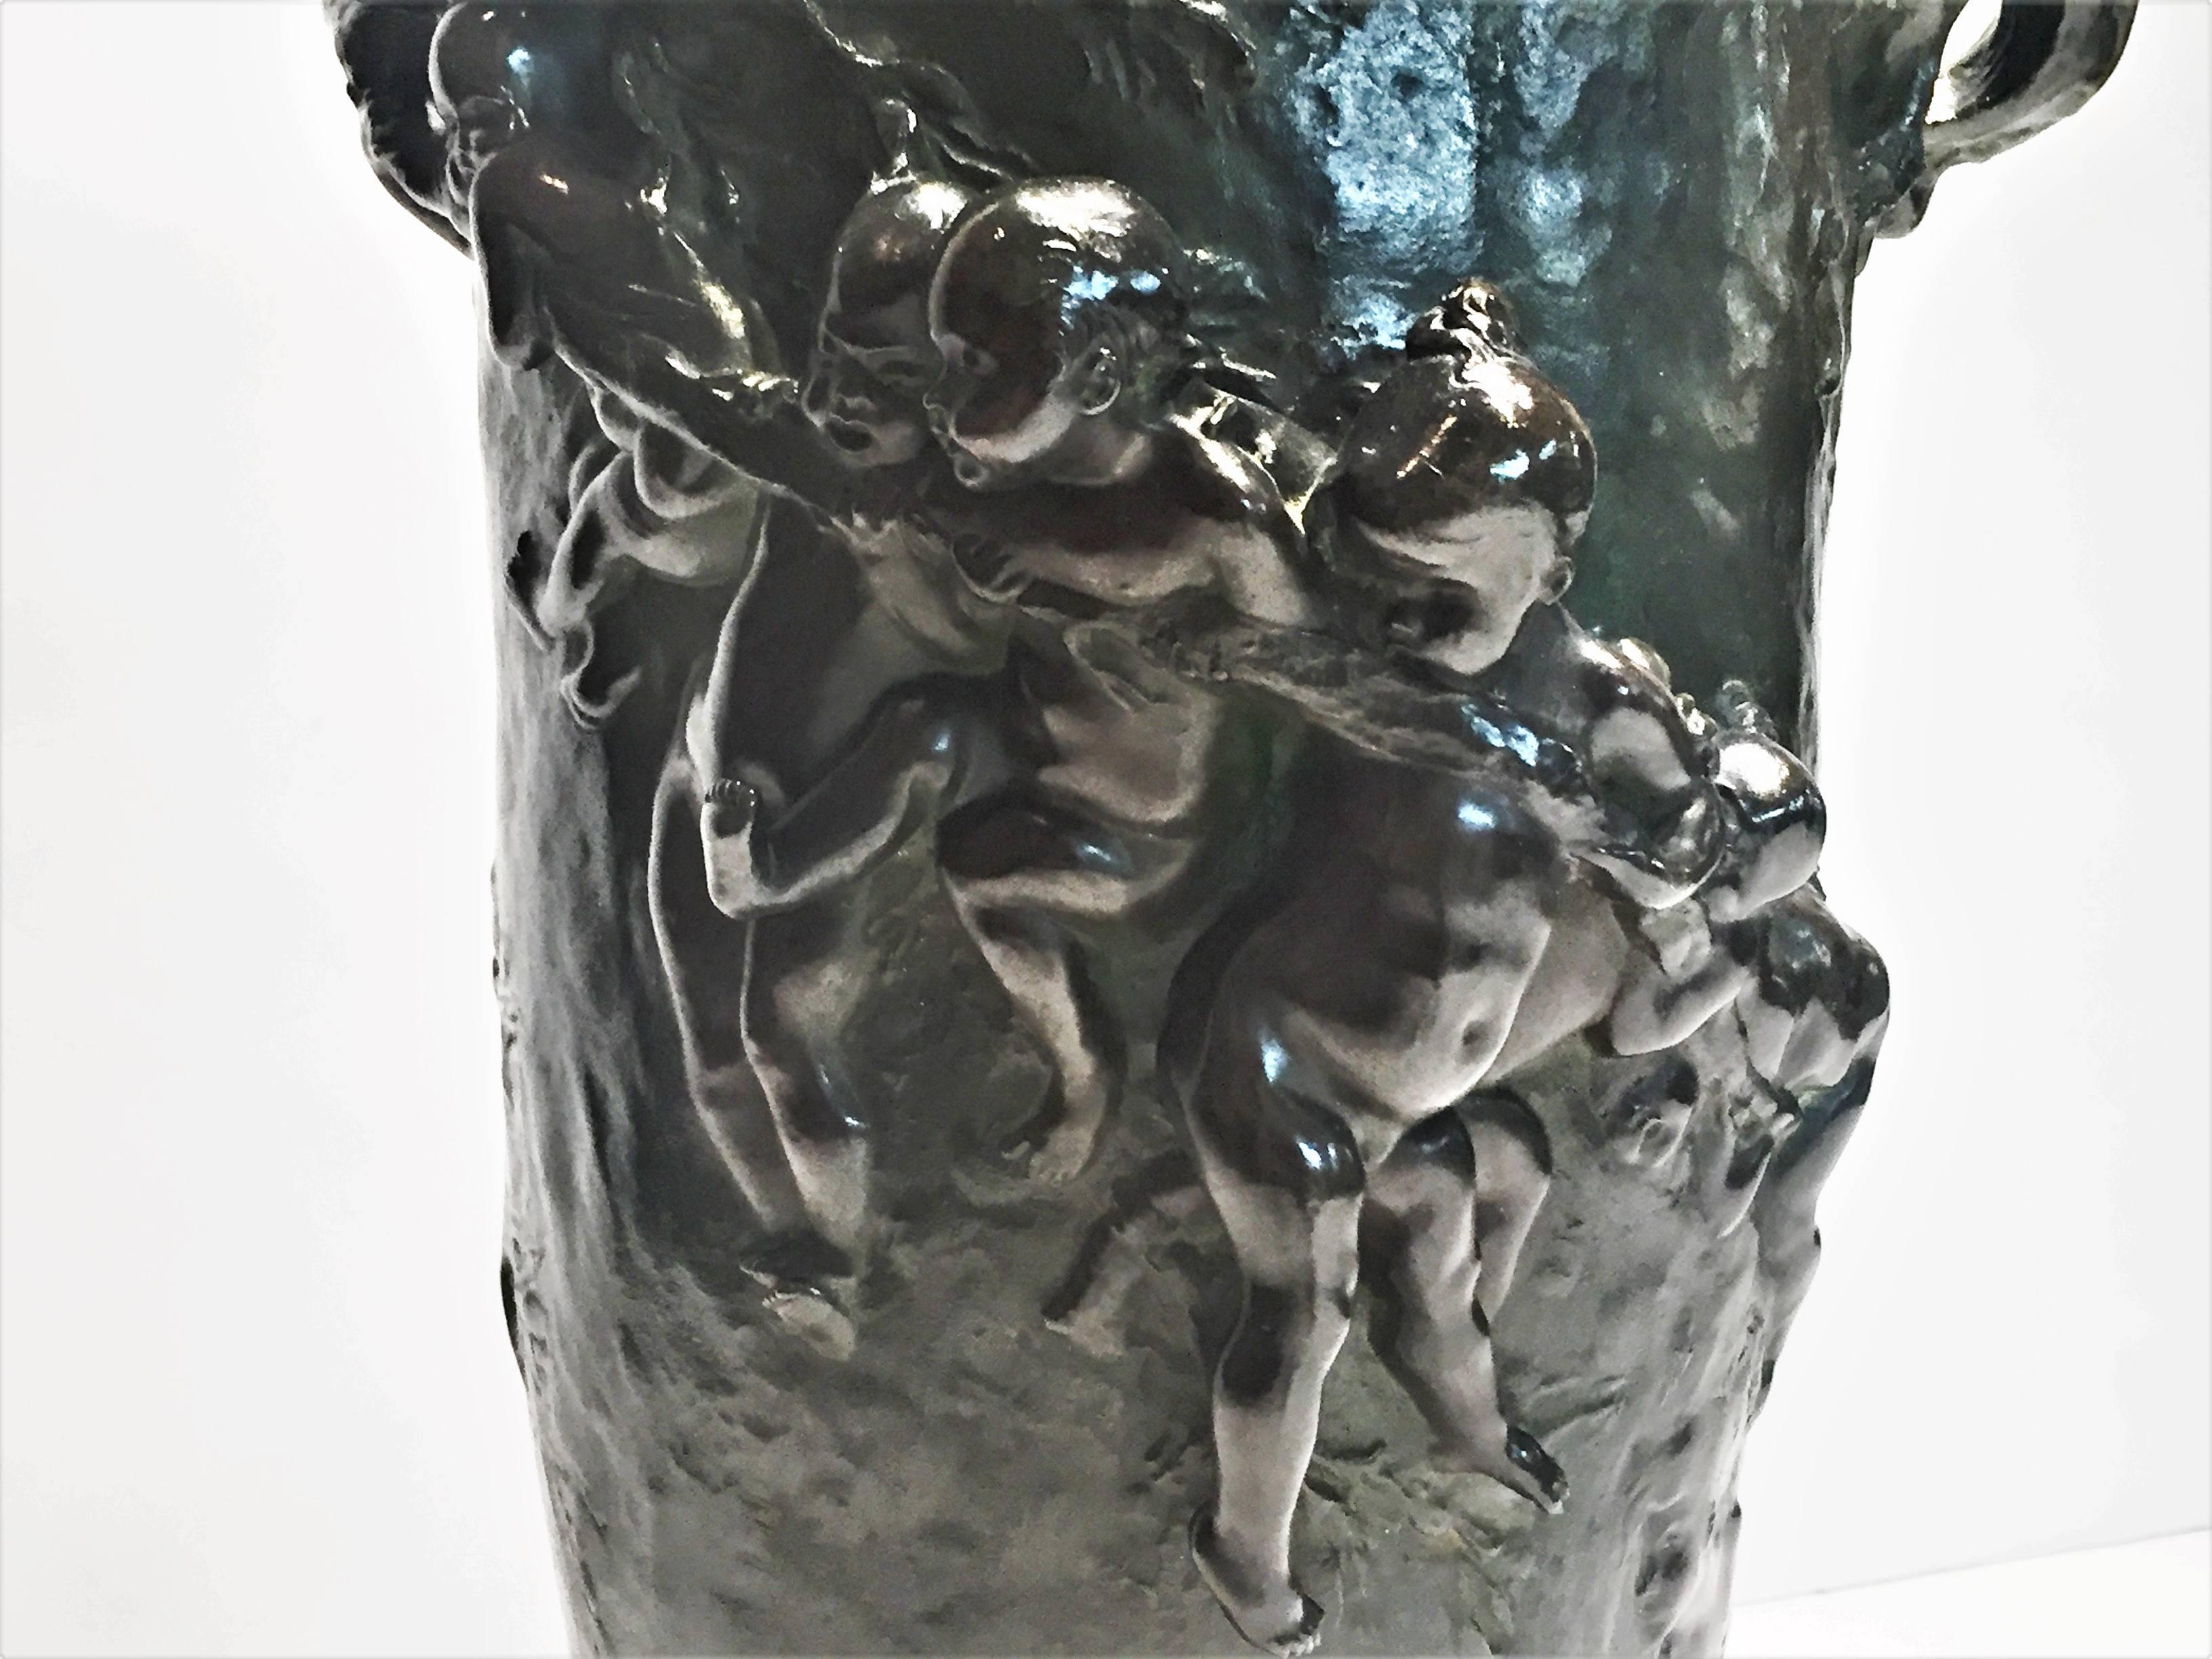 Signed ‘Joseph Chéret’ and E. Soleau. Editr. Paris 

Cast by the famous Paris foundry of Eugene Soleau, this outstanding sculptural flower vase features a picturesque group of puttee, frightened by two big frogs.

Joseph Gustave Chéret